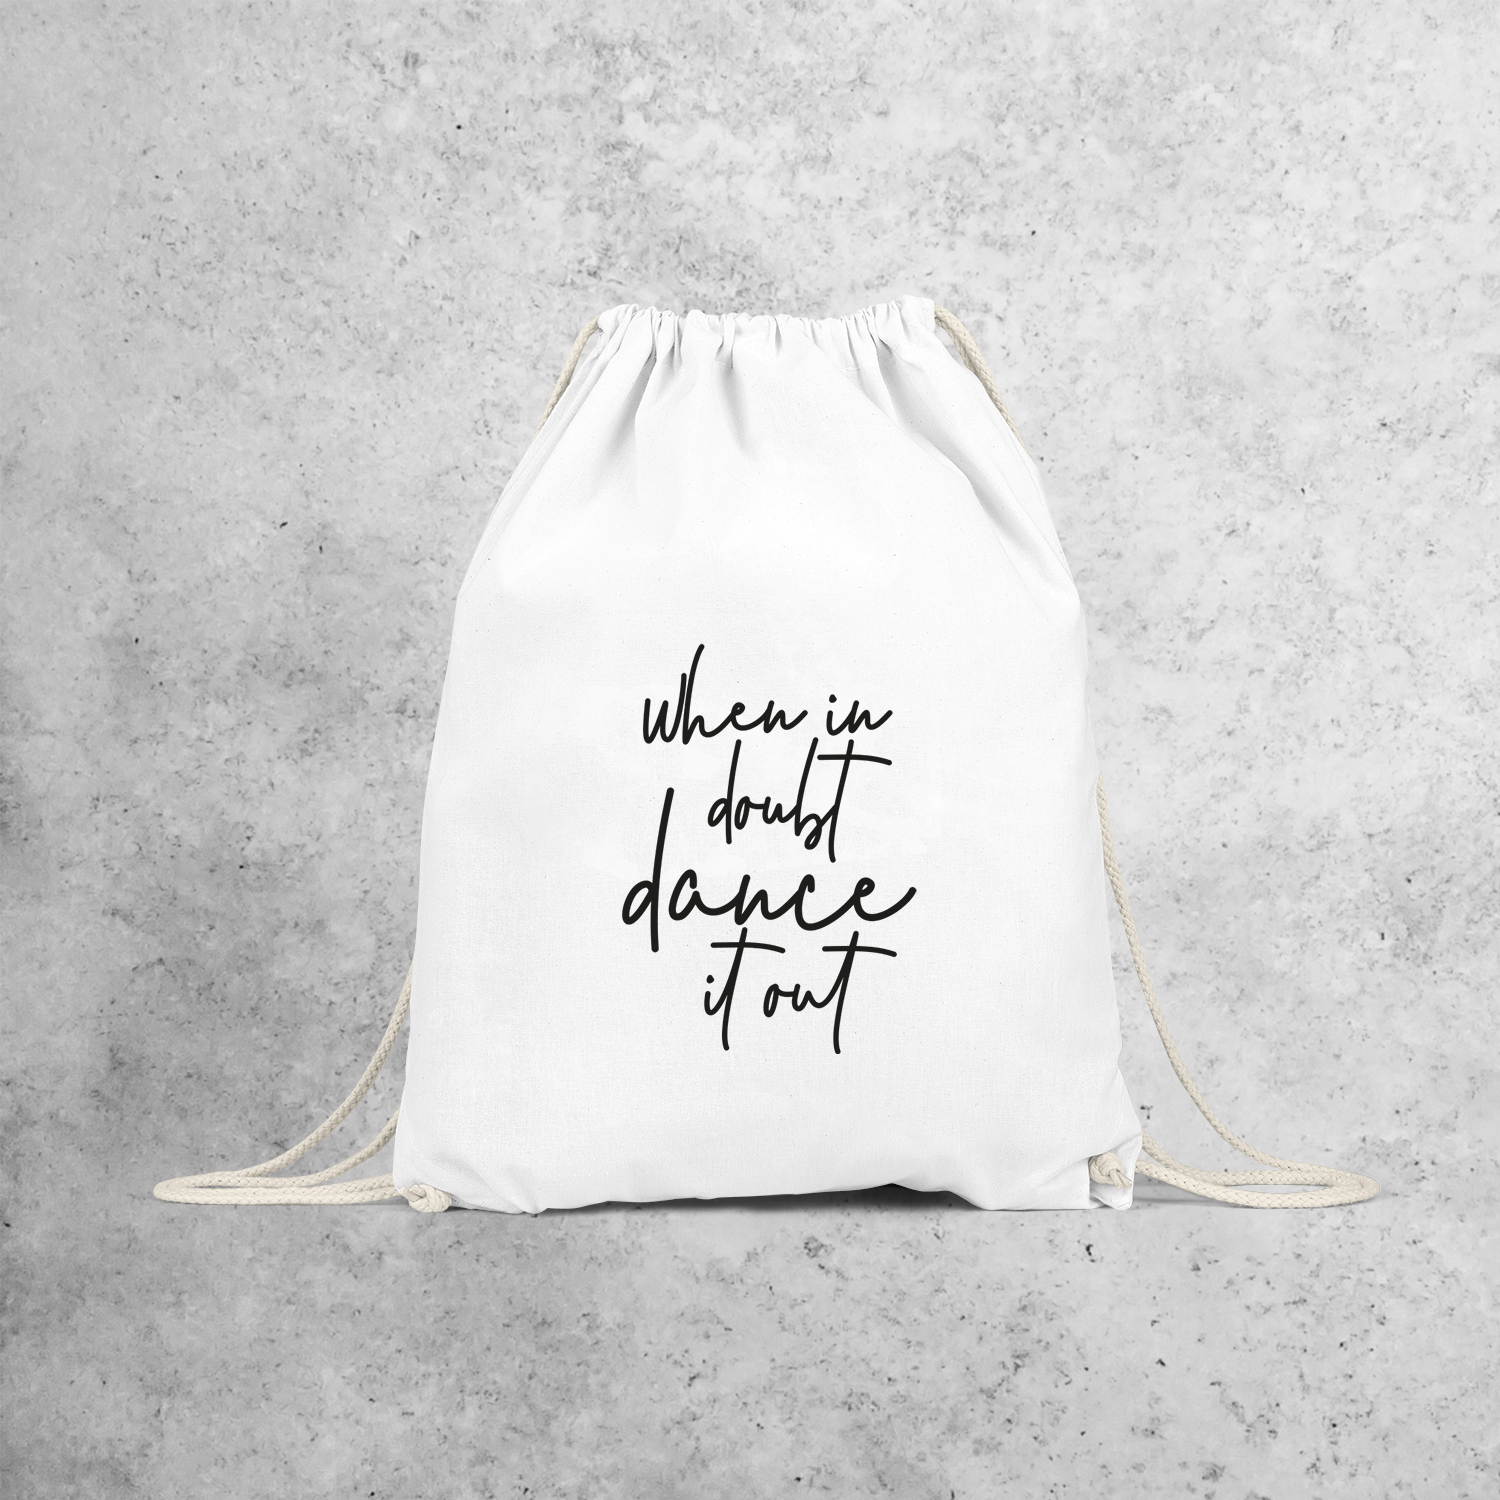 'When in doubt, dance it out' backpack